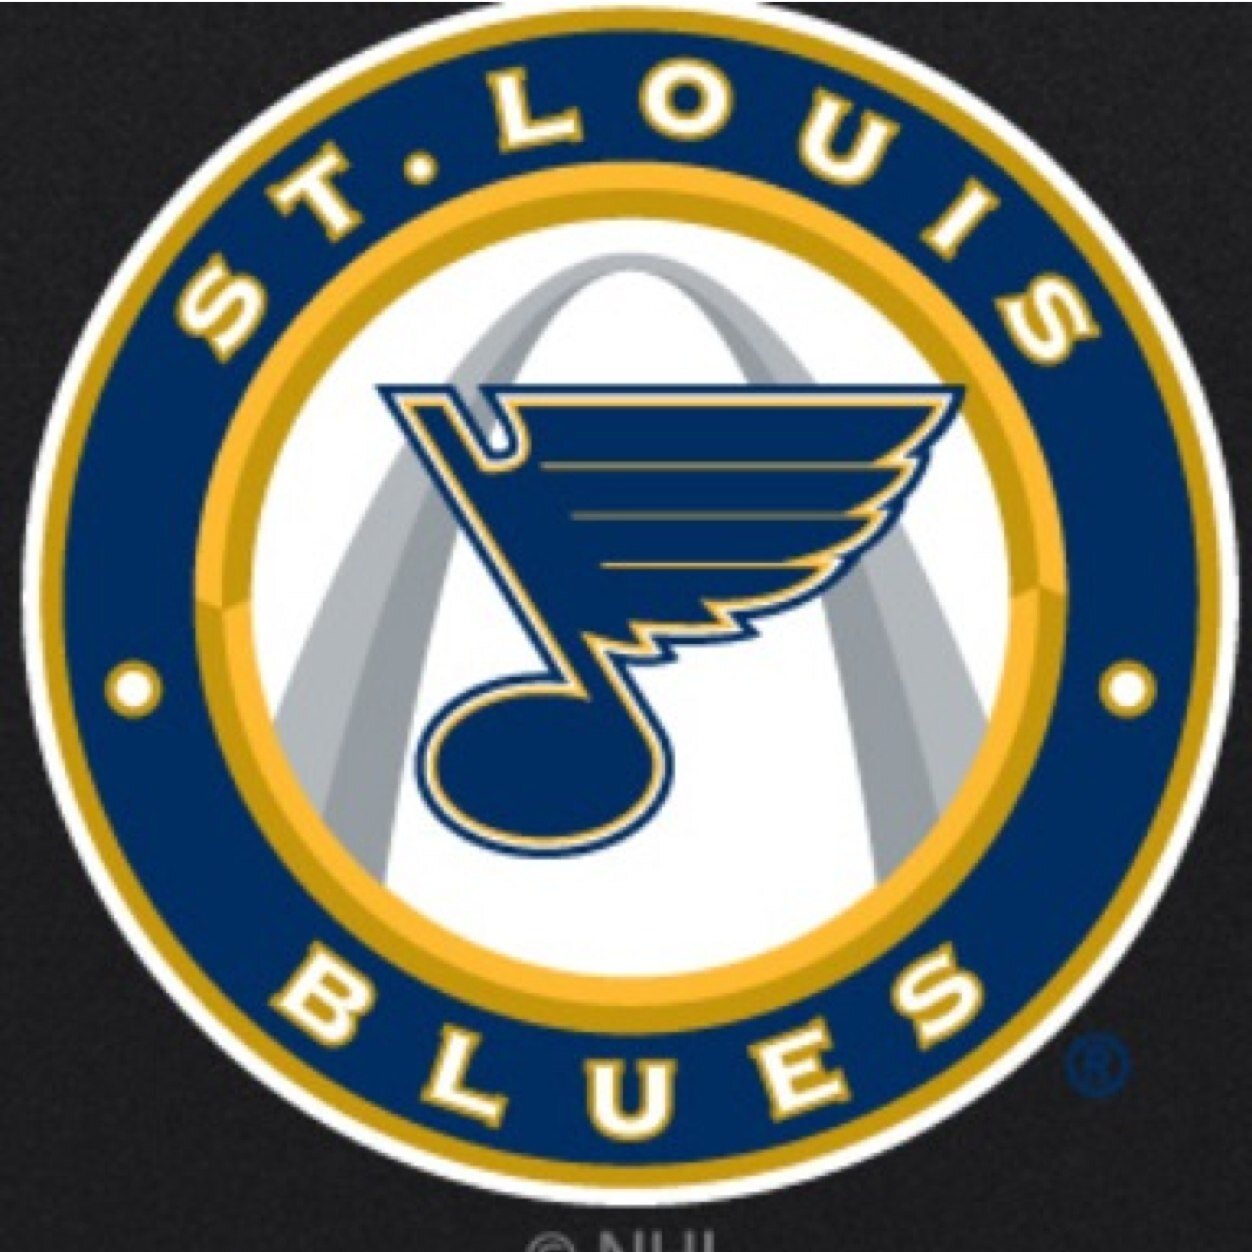 Covering Trades, injuries and all things St. Louis Blues. Associated with @TheNHLFiles. Account Run by @babygotbackes42